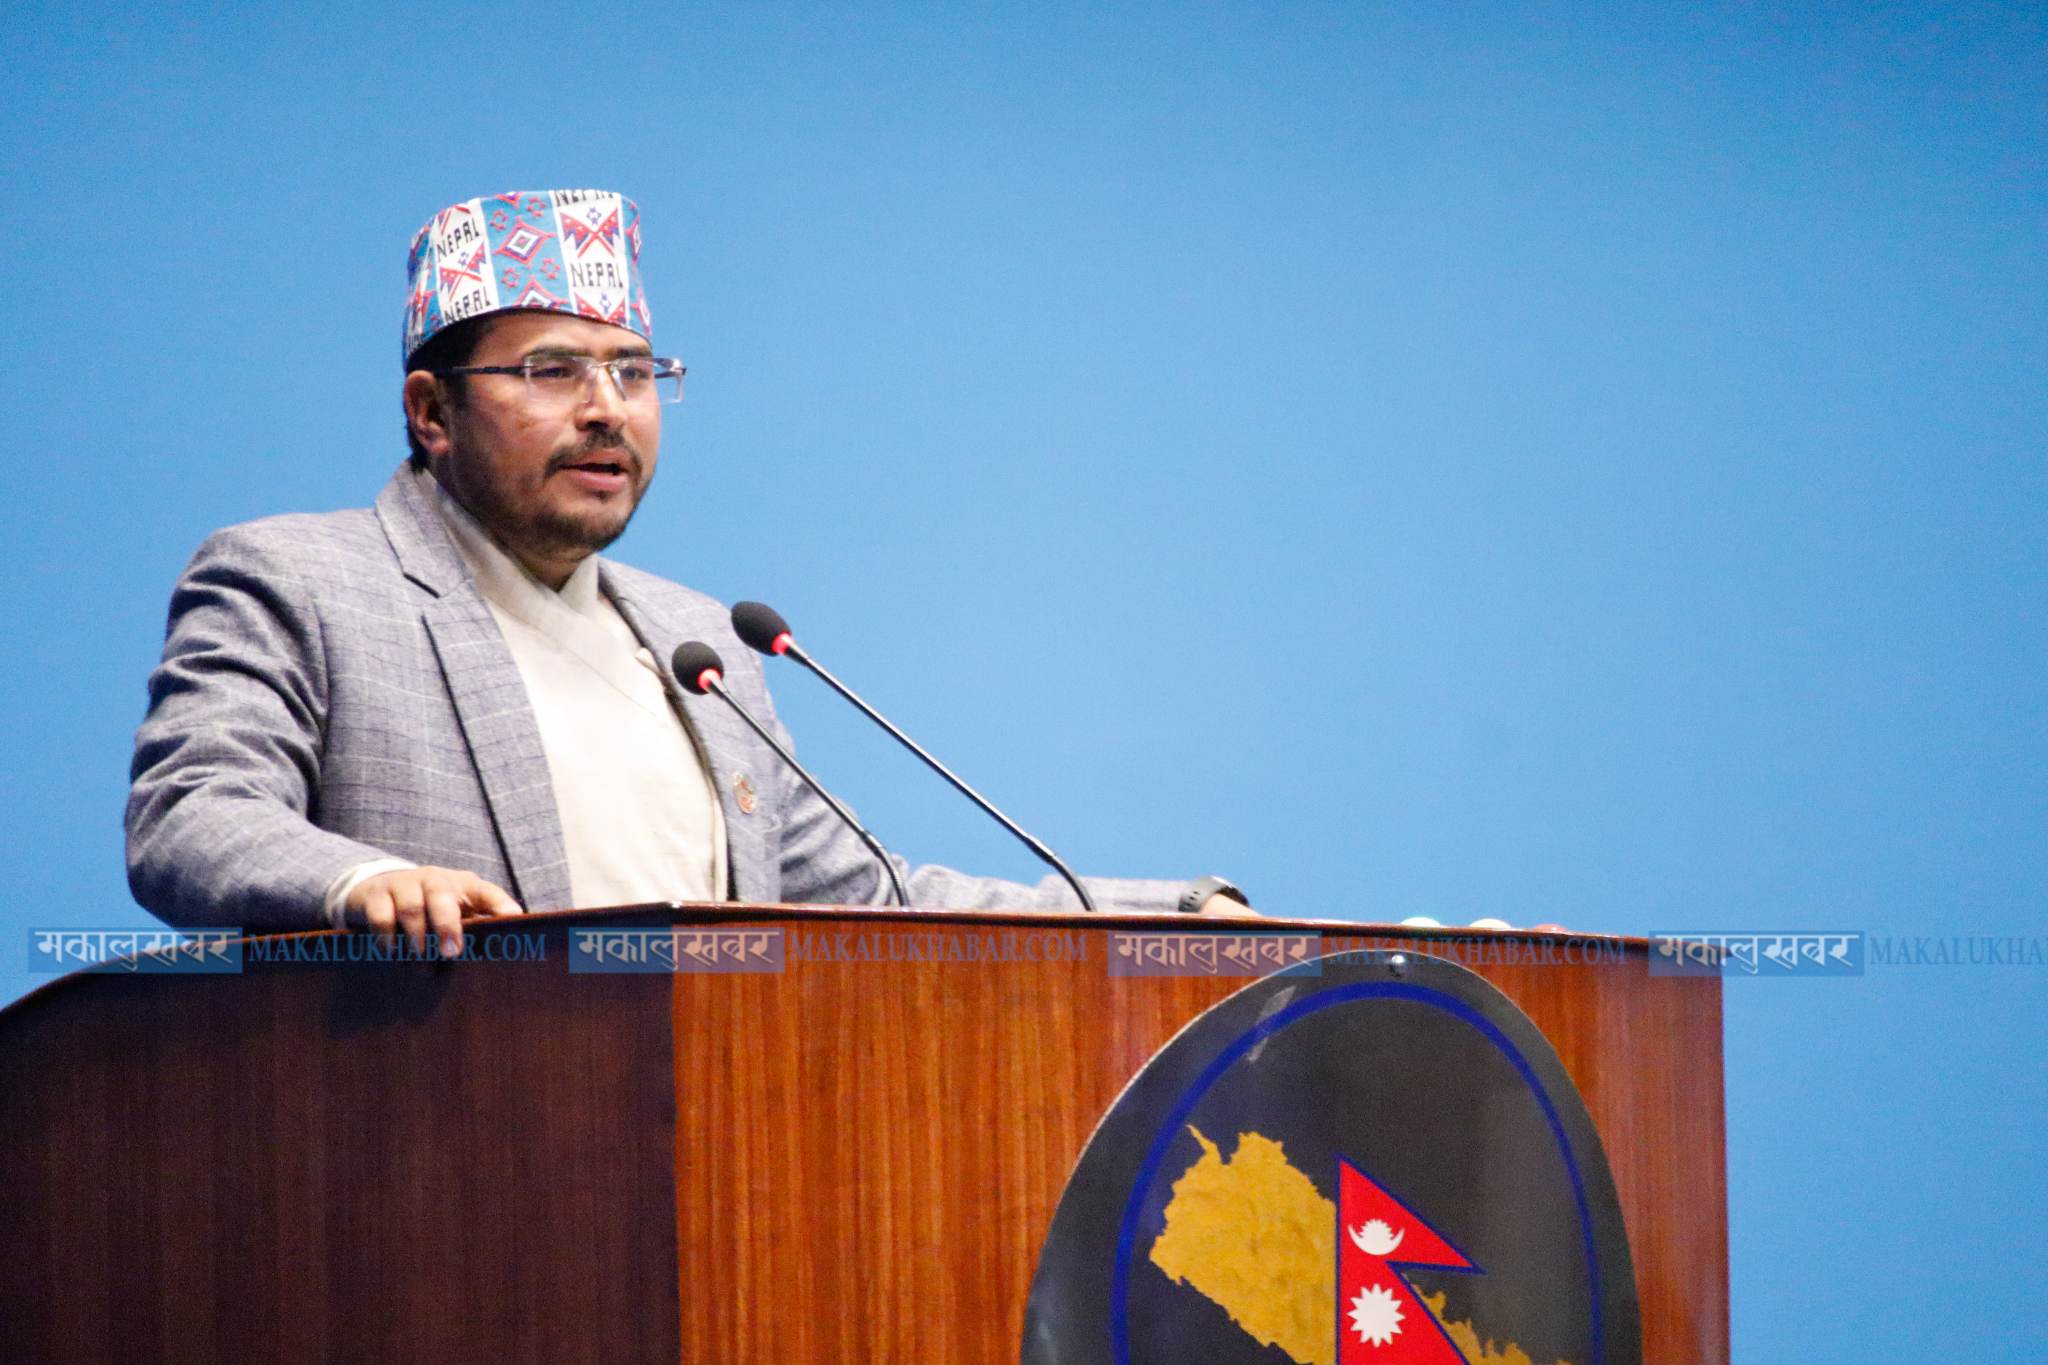 Gyan Bahadur Shahi made a request to form an inquiry committee on Jalhari case